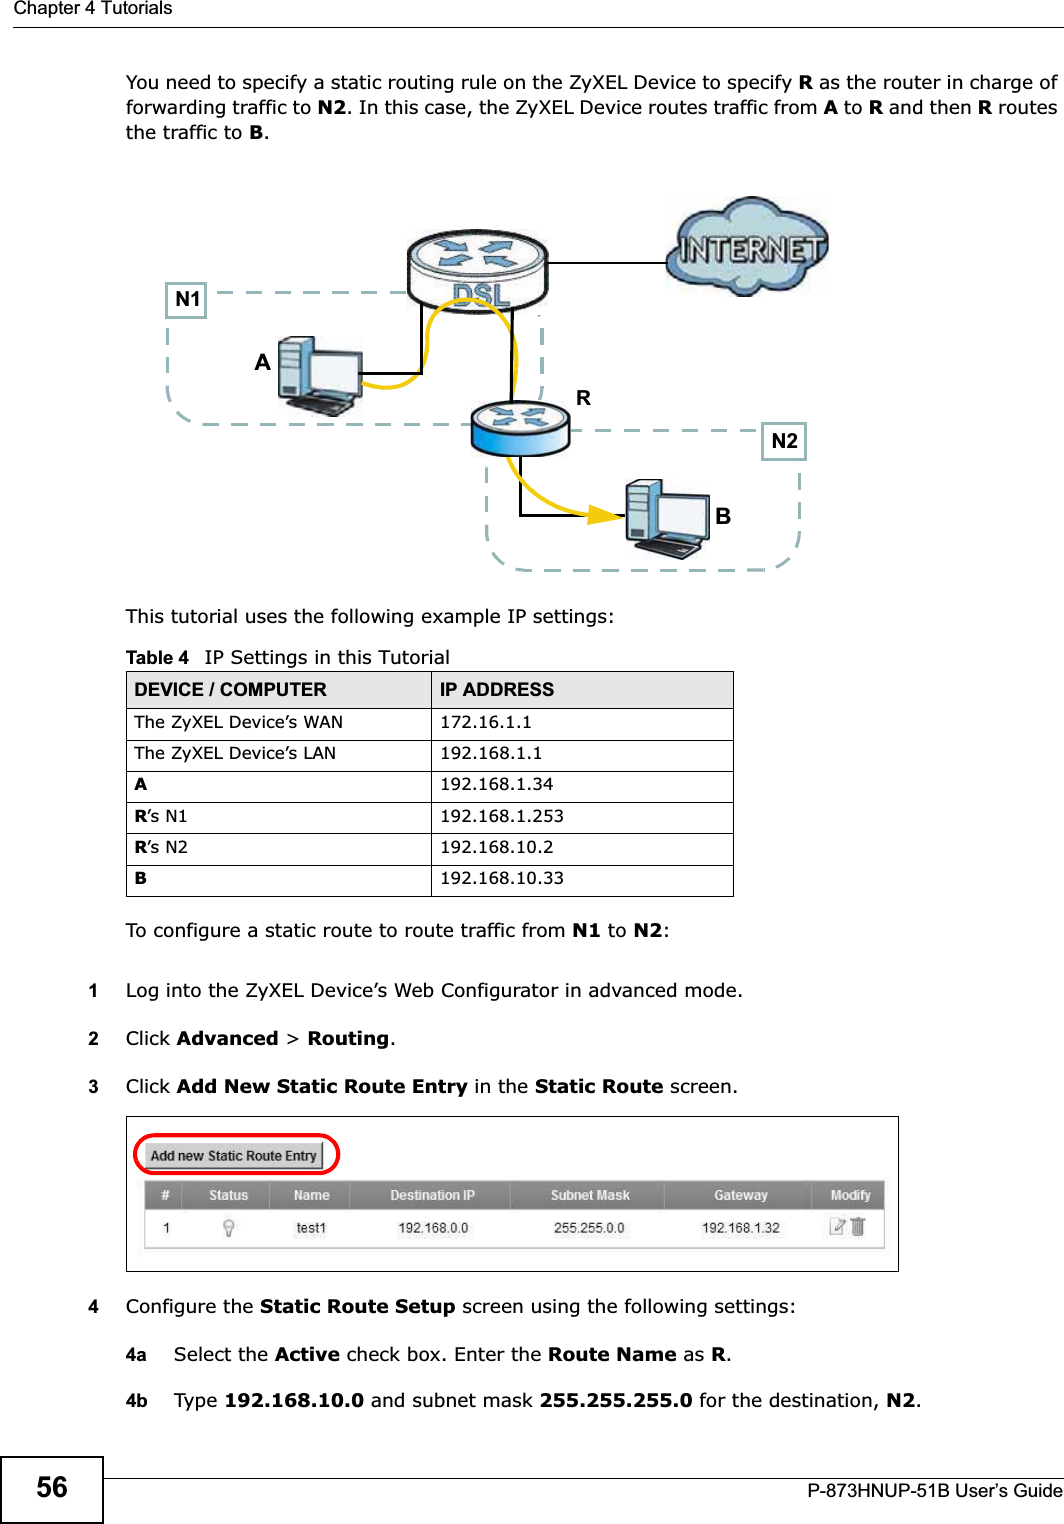 Chapter 4 TutorialsP-873HNUP-51B User’s Guide56You need to specify a static routing rule on the ZyXEL Device to specify R as the router in charge of forwarding traffic to N2. In this case, the ZyXEL Device routes traffic from A to R and then R routes the traffic to B.This tutorial uses the following example IP settings:To configure a static route to route traffic from N1 to N2:1Log into the ZyXEL Device’s Web Configurator in advanced mode.2Click Advanced &gt; Routing.3Click Add New Static Route Entry in the Static Route screen.4Configure the Static Route Setup screen using the following settings:4a Select the Active check box. Enter the Route Name as R.4b Type 192.168.10.0 and subnet mask 255.255.255.0 for the destination, N2.Table 4   IP Settings in this TutorialDEVICE / COMPUTER IP ADDRESSThe ZyXEL Device’s WAN 172.16.1.1The ZyXEL Device’s LAN 192.168.1.1A192.168.1.34R’s N1  192.168.1.253R’s N2  192.168.10.2B192.168.10.33N2BN1AR